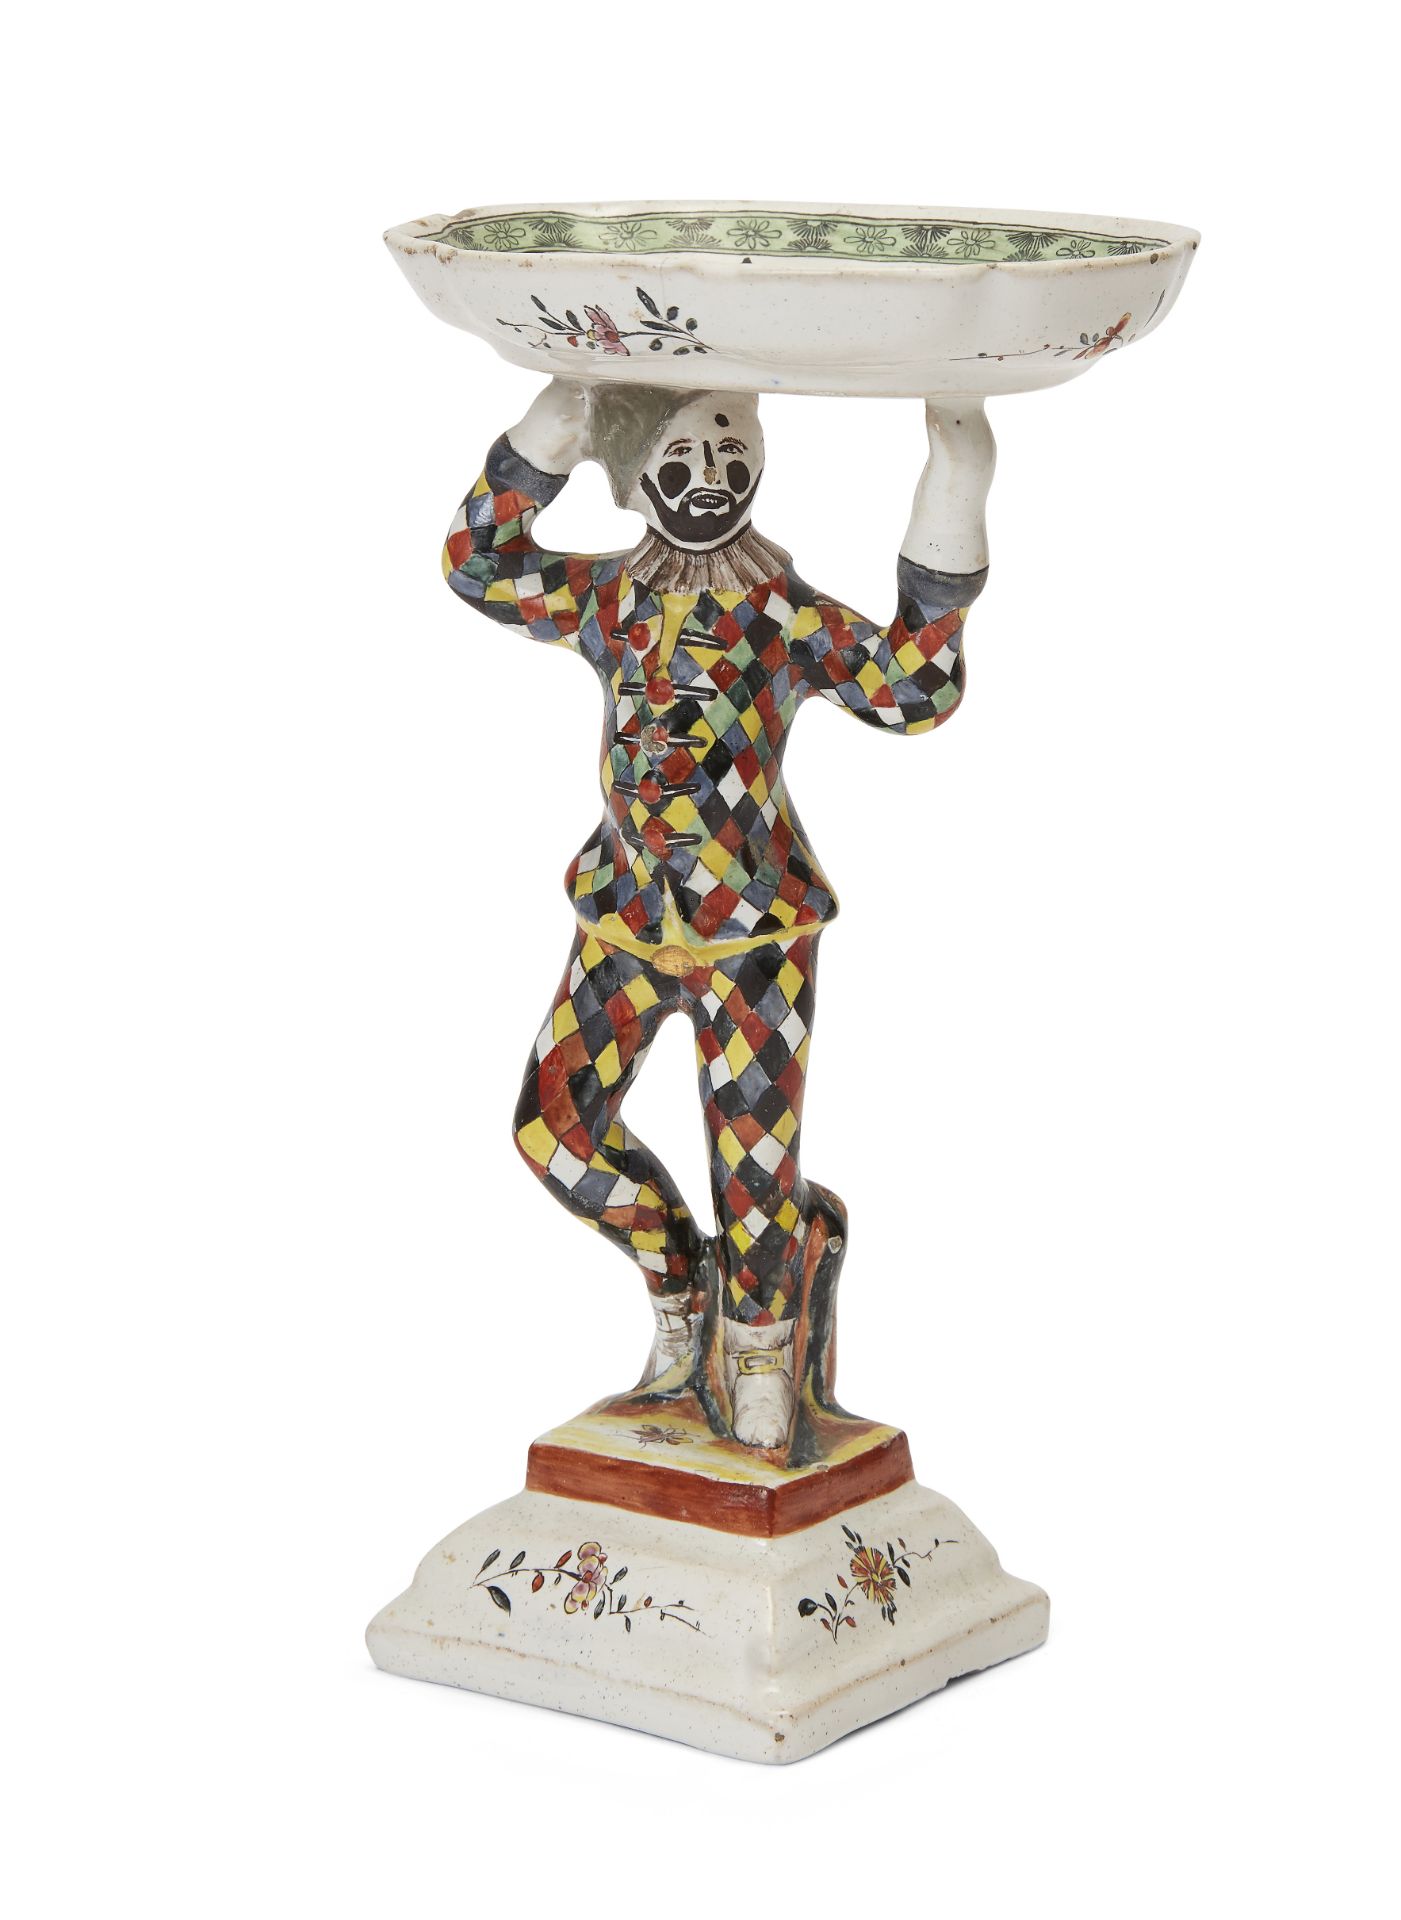 A Bayreuth fayence salt, mid-18th century, blue B·K mark, modelled with Harlequin from the Commed...